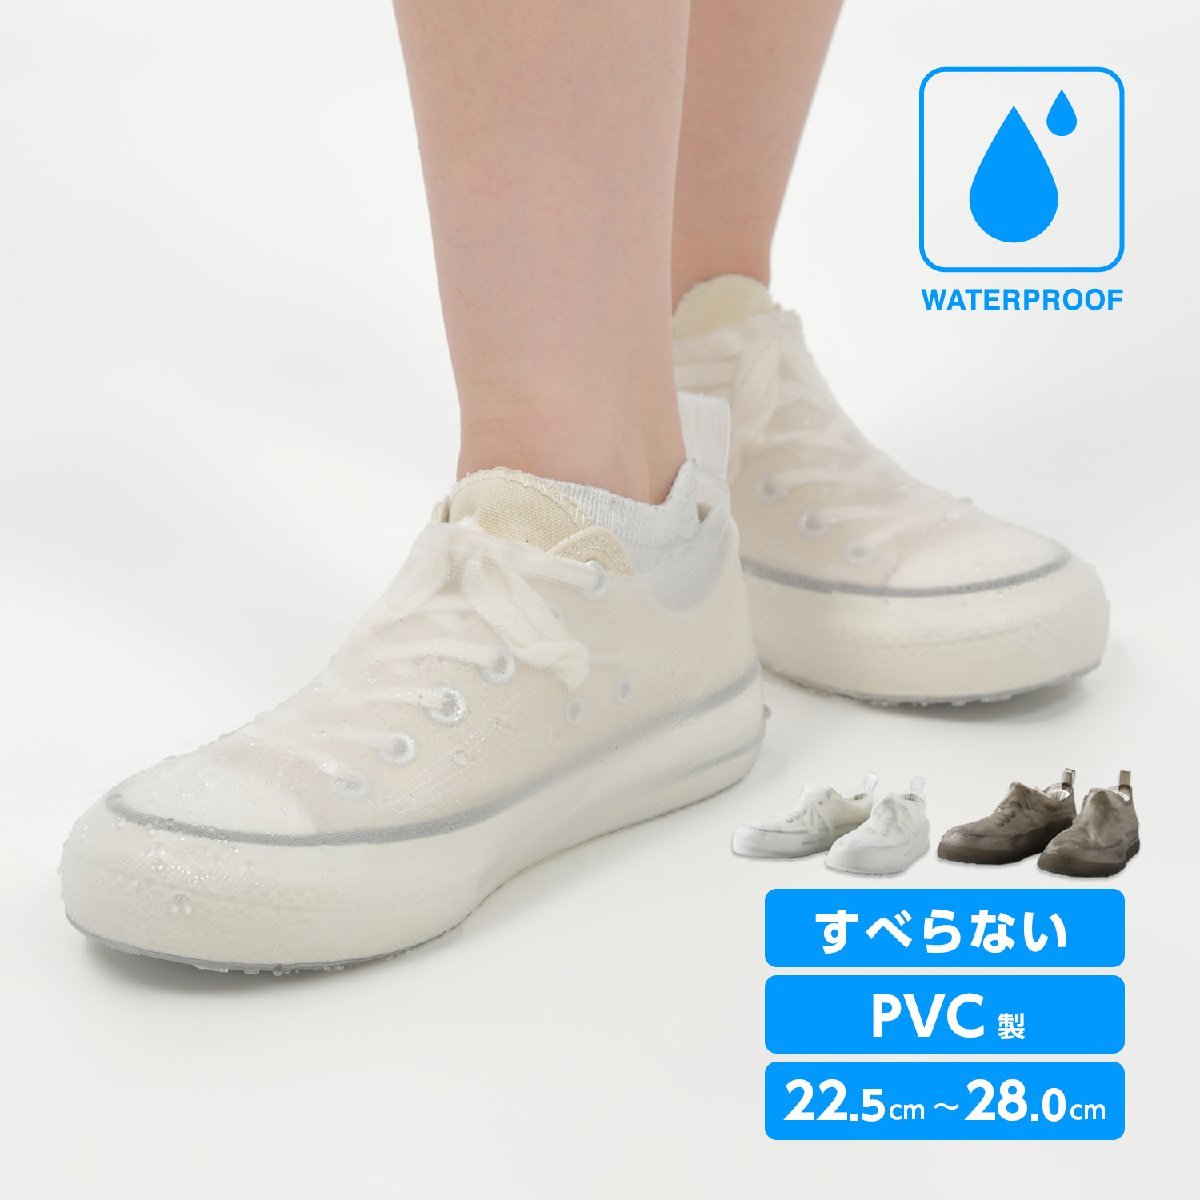  rain shoes cover slipping difficult clear 22.5~23.0cm shoe sole ~25cm lady's commuting stylish waterproof PVC